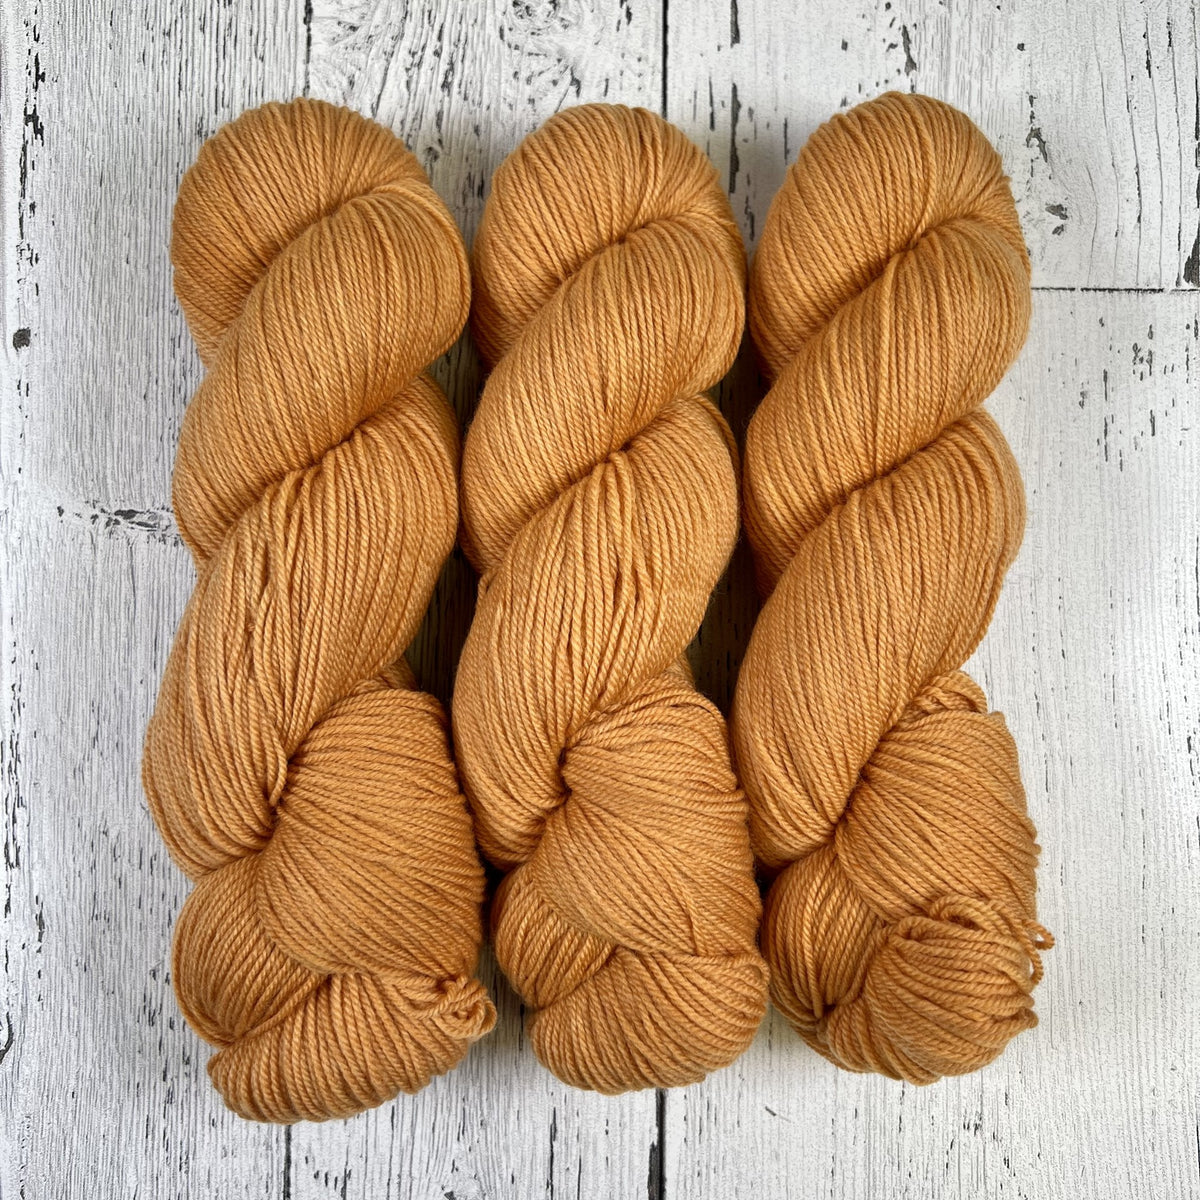 Apricot - Revival Worsted - Dyed Stock